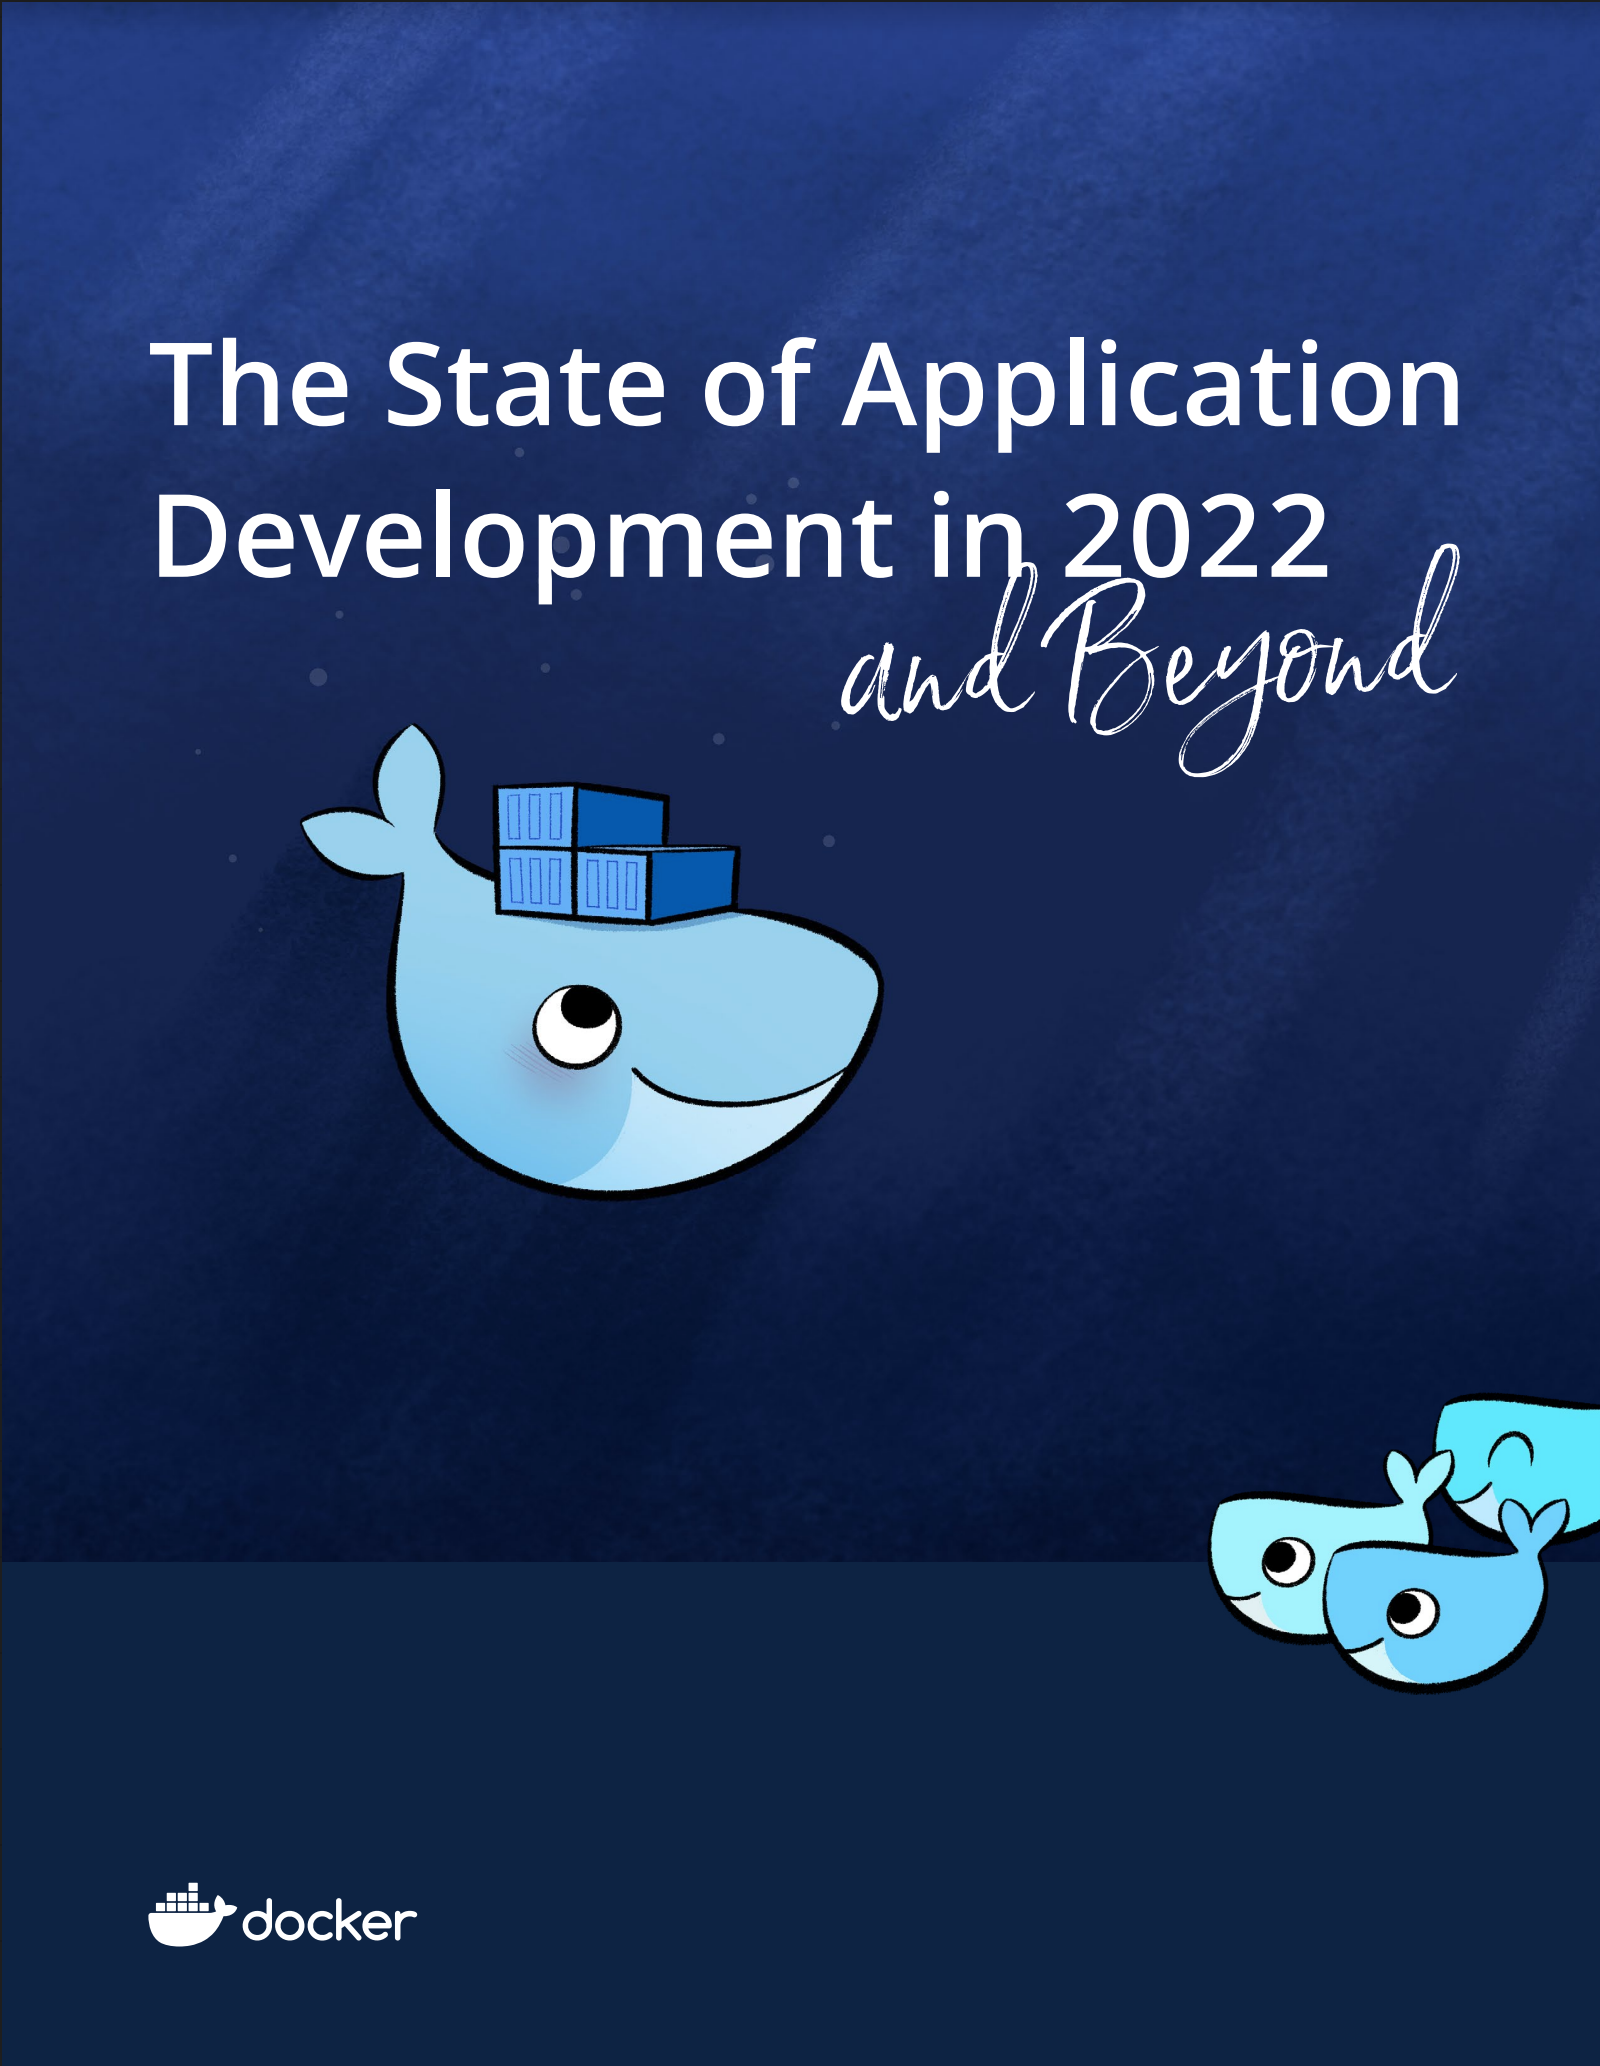 The state of application development in 2022